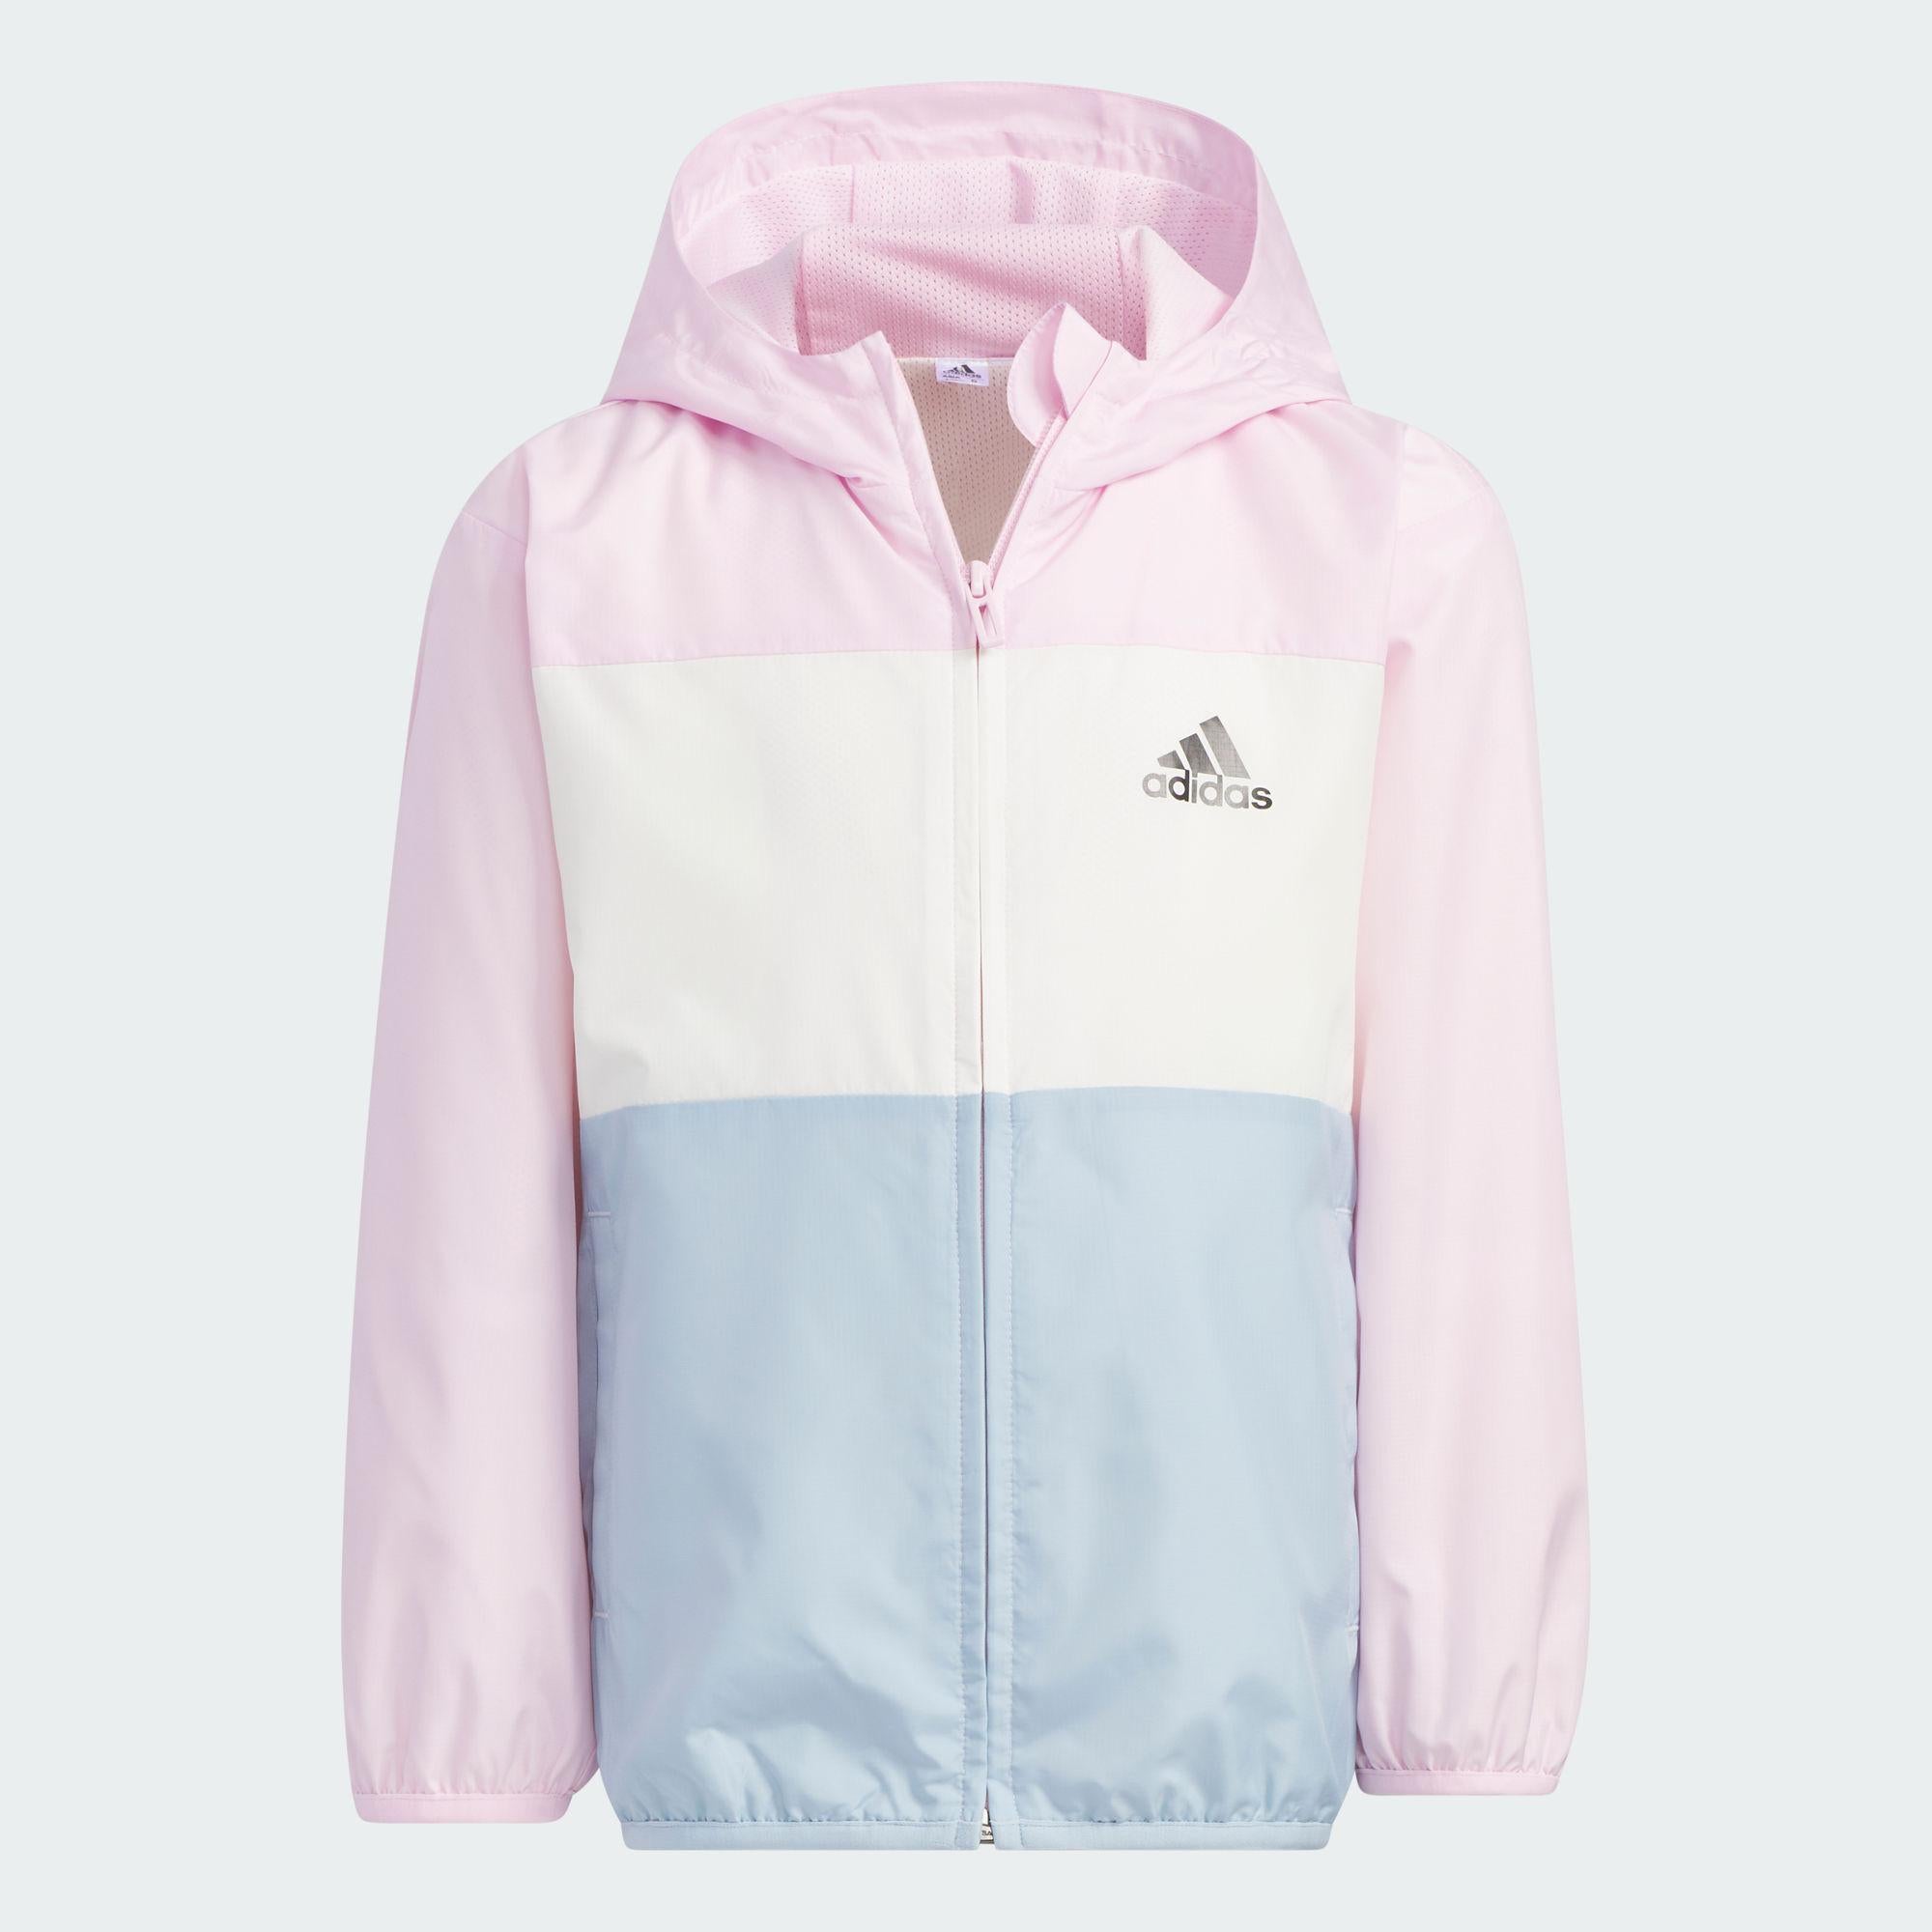  Adidas, clothes,  girl, ISC CCA7M, 上著, 外套, 小女, 小童, 帽TEE, 長袖,open for kids